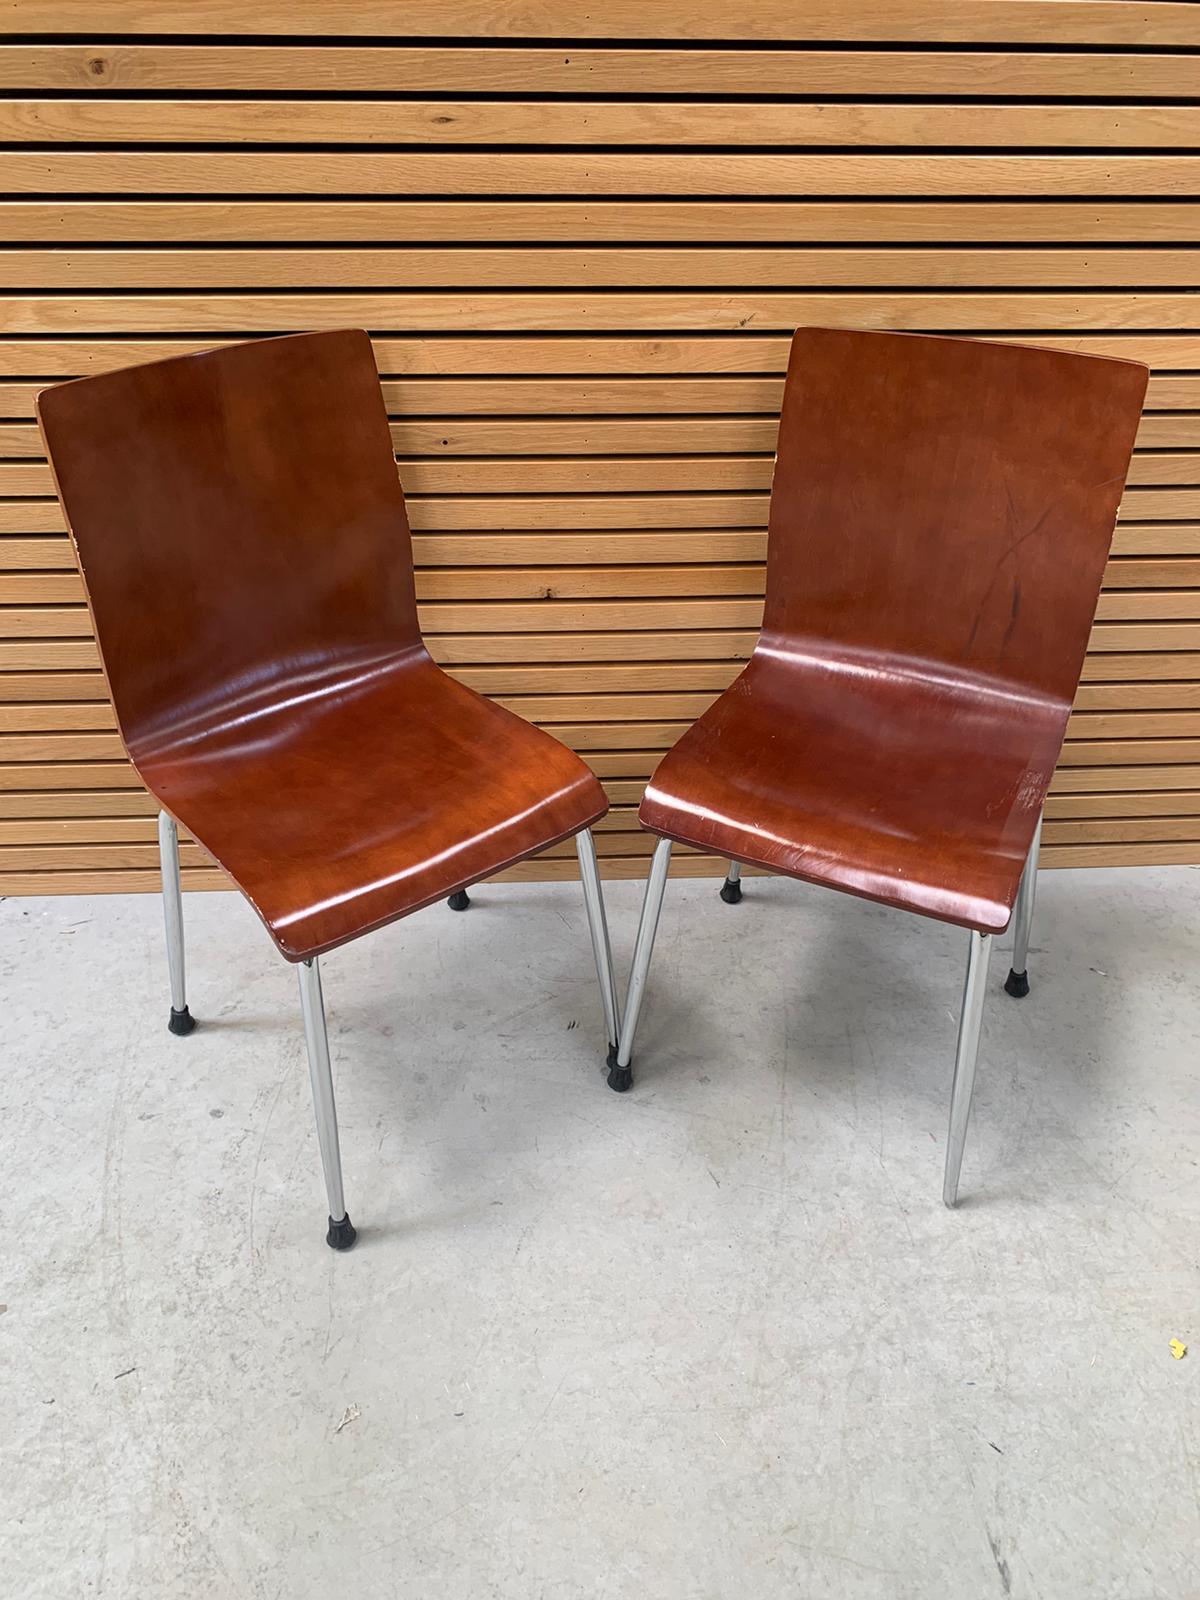 Dark Woodgrain Effect Commercial Grade Chairs Set - Image 2 of 6